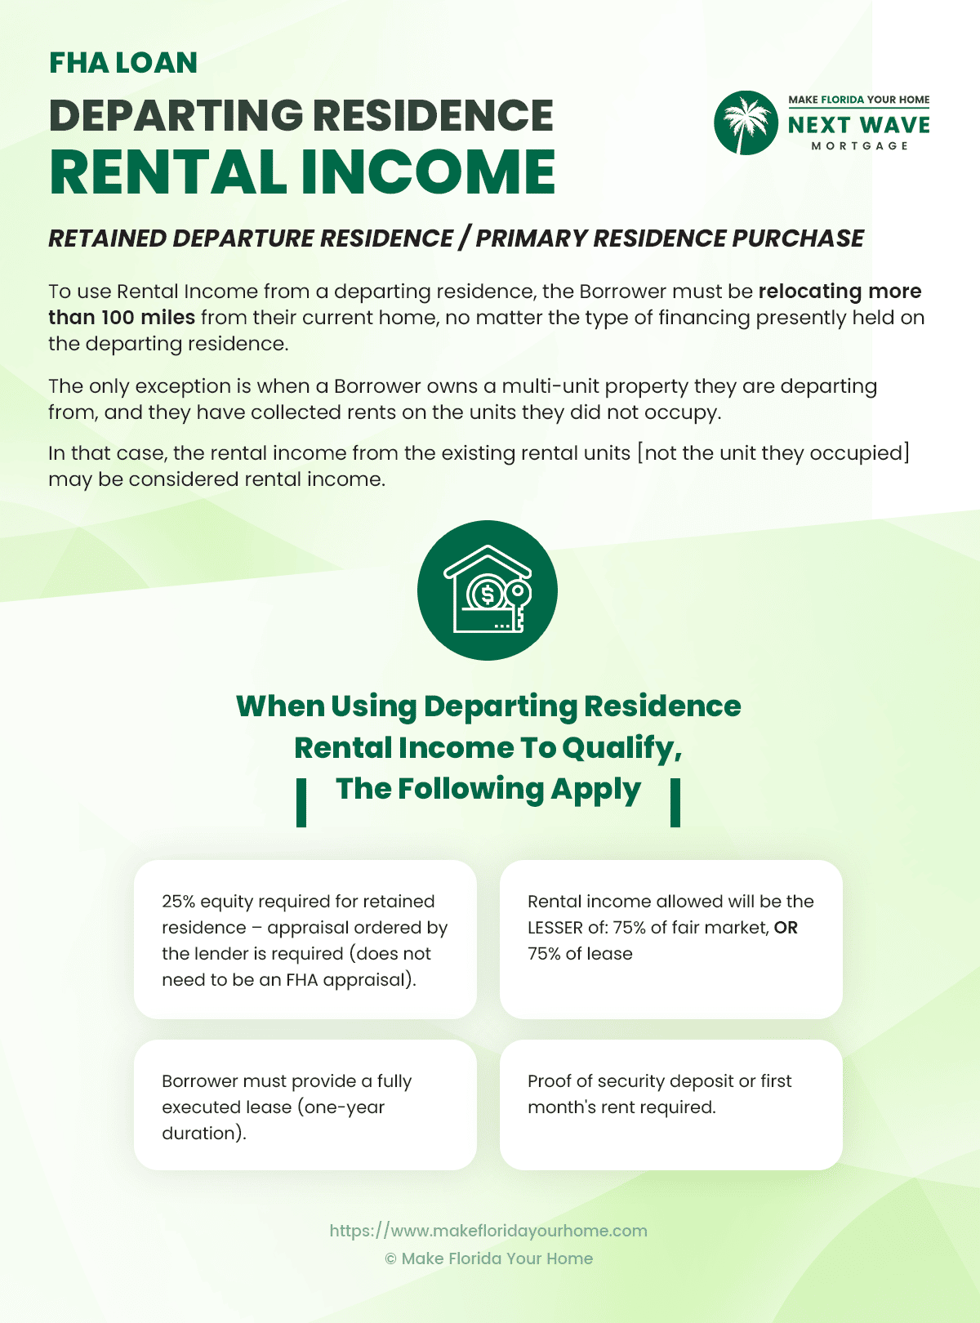 FHA Loan - Departing Residence Rental Income - Infographic